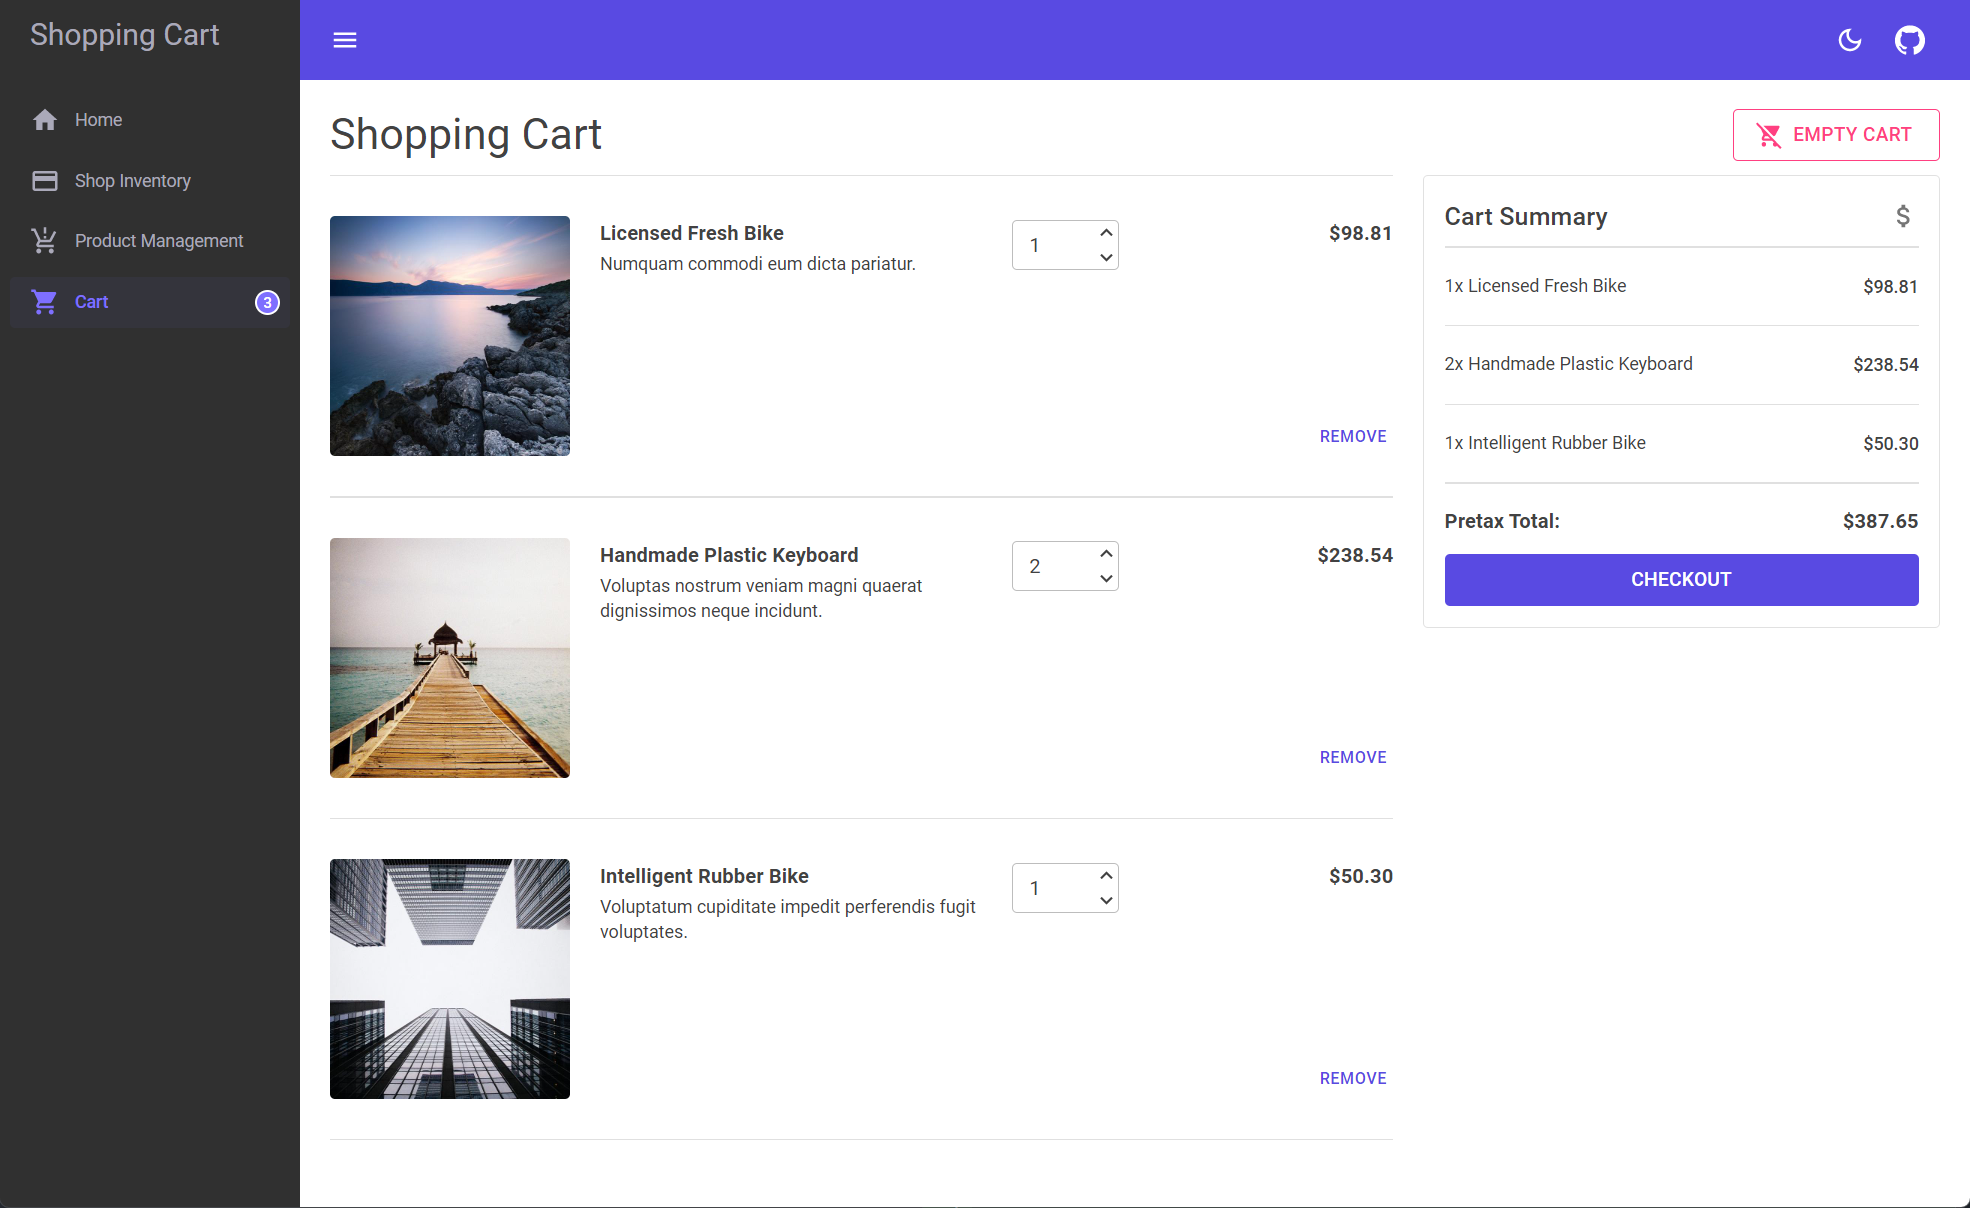 Orleans: Shopping Cart sample app, items in cart page.